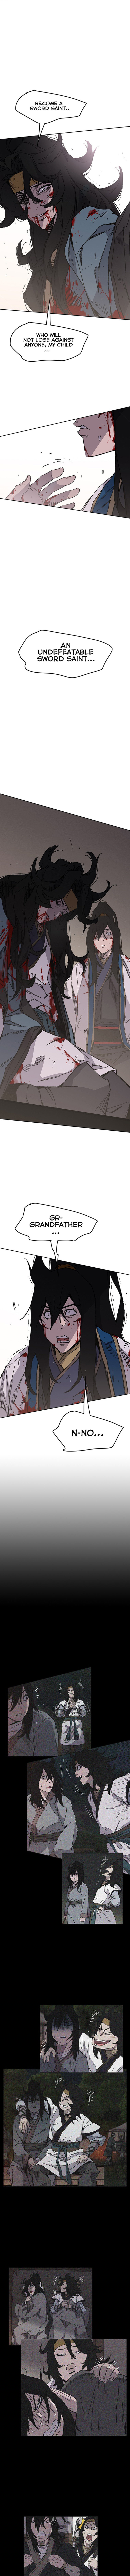 The Undefeatable Swordsman - Chapter 123 Page 6